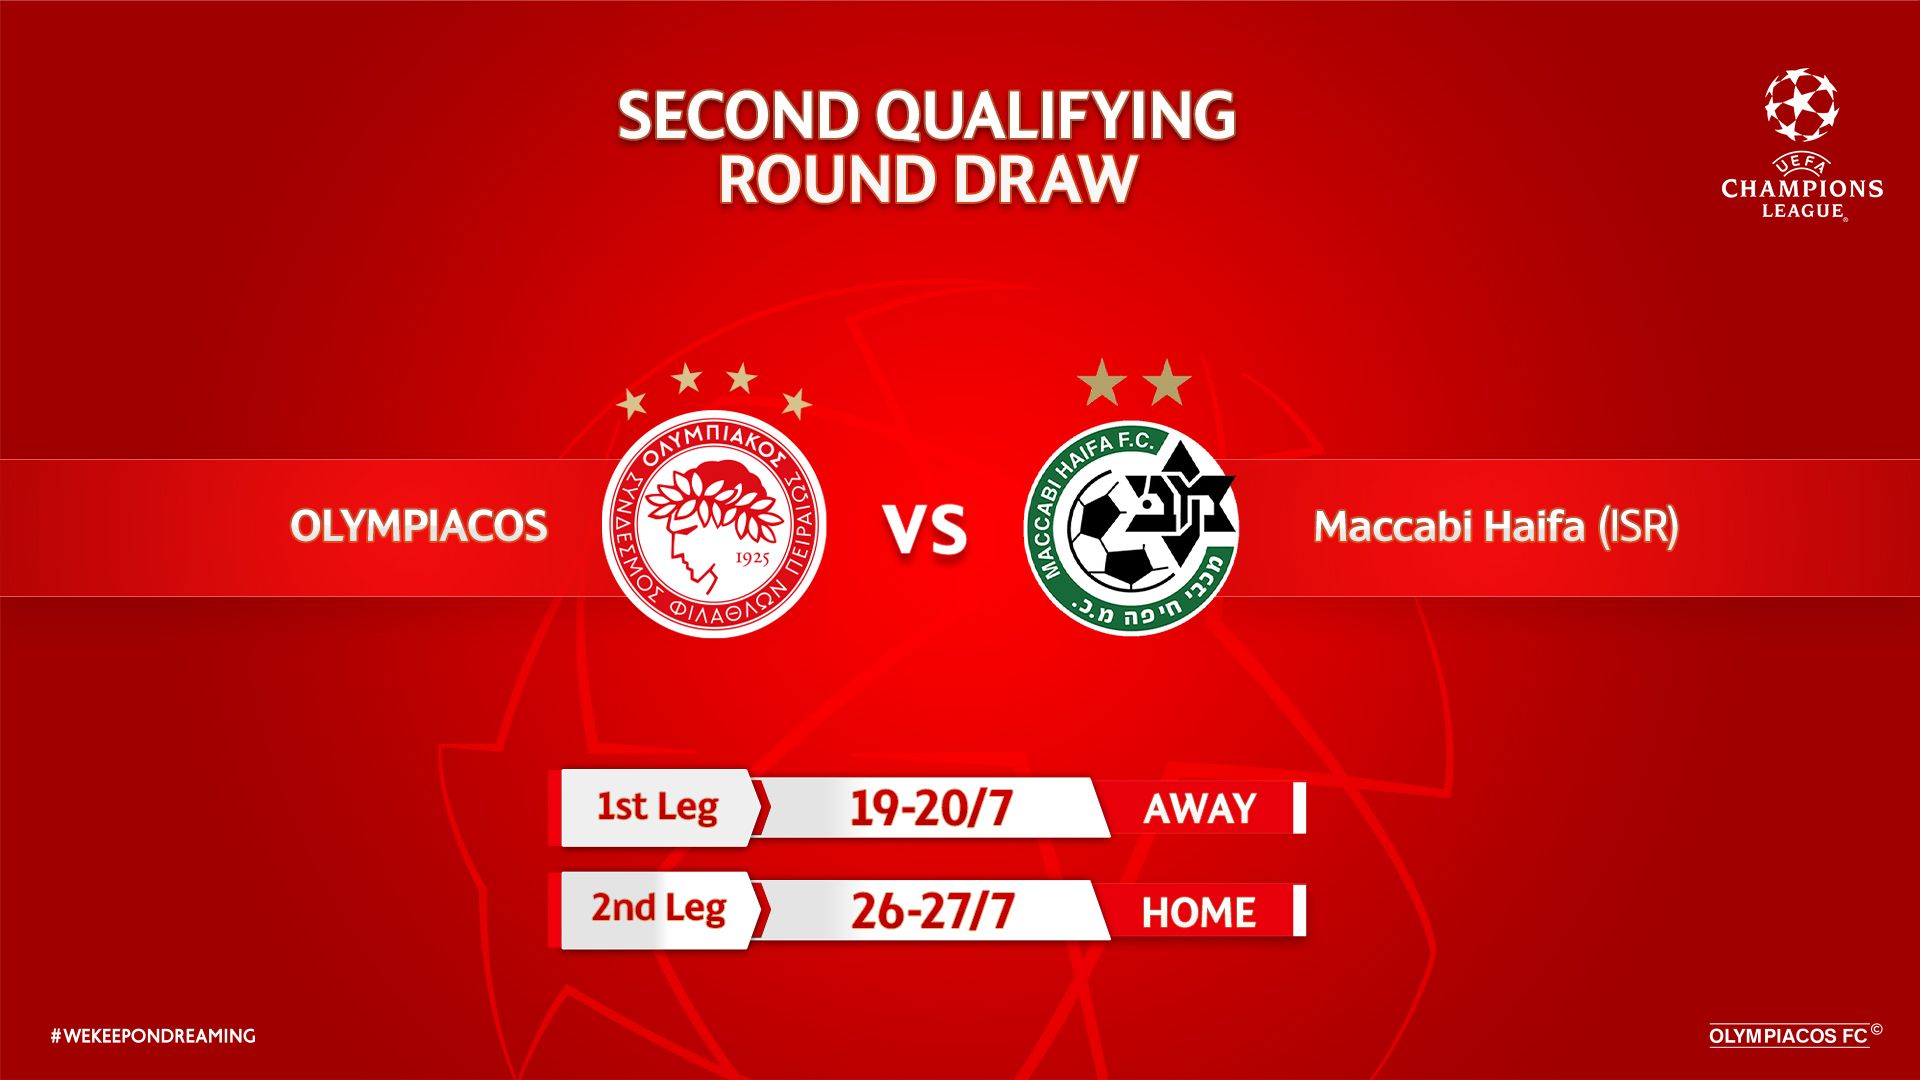 Olympiacos against Maccabi Haifa for the second round of the UCL qualification